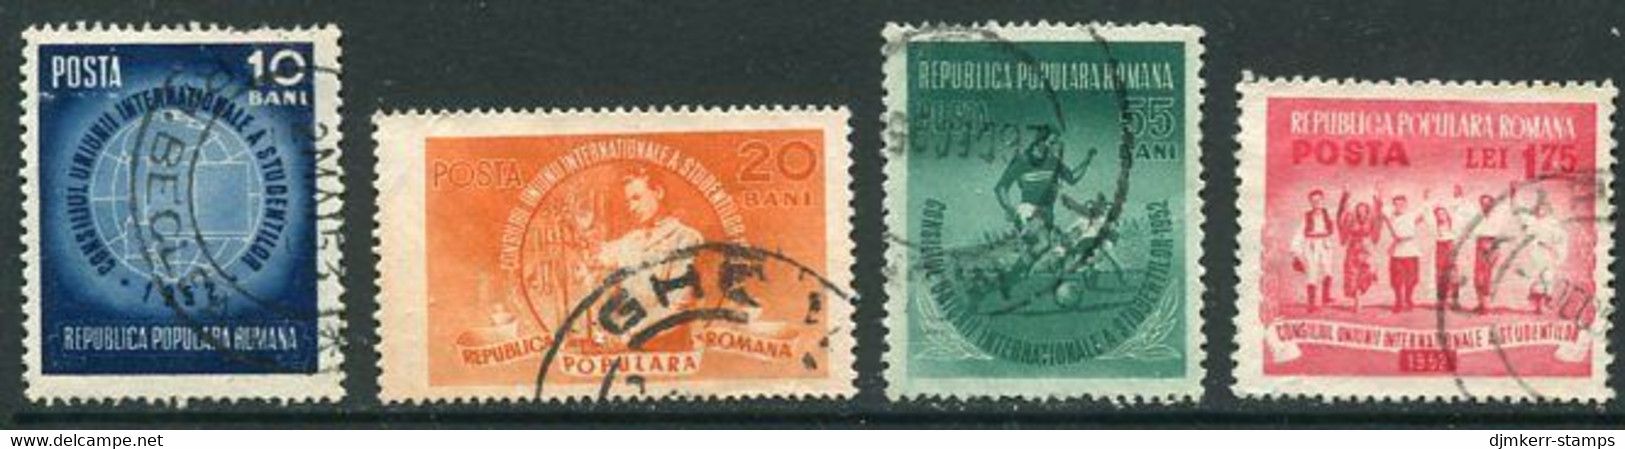 ROMANIA 1952 Student Congress Used.  Michel 1404-07 - Used Stamps